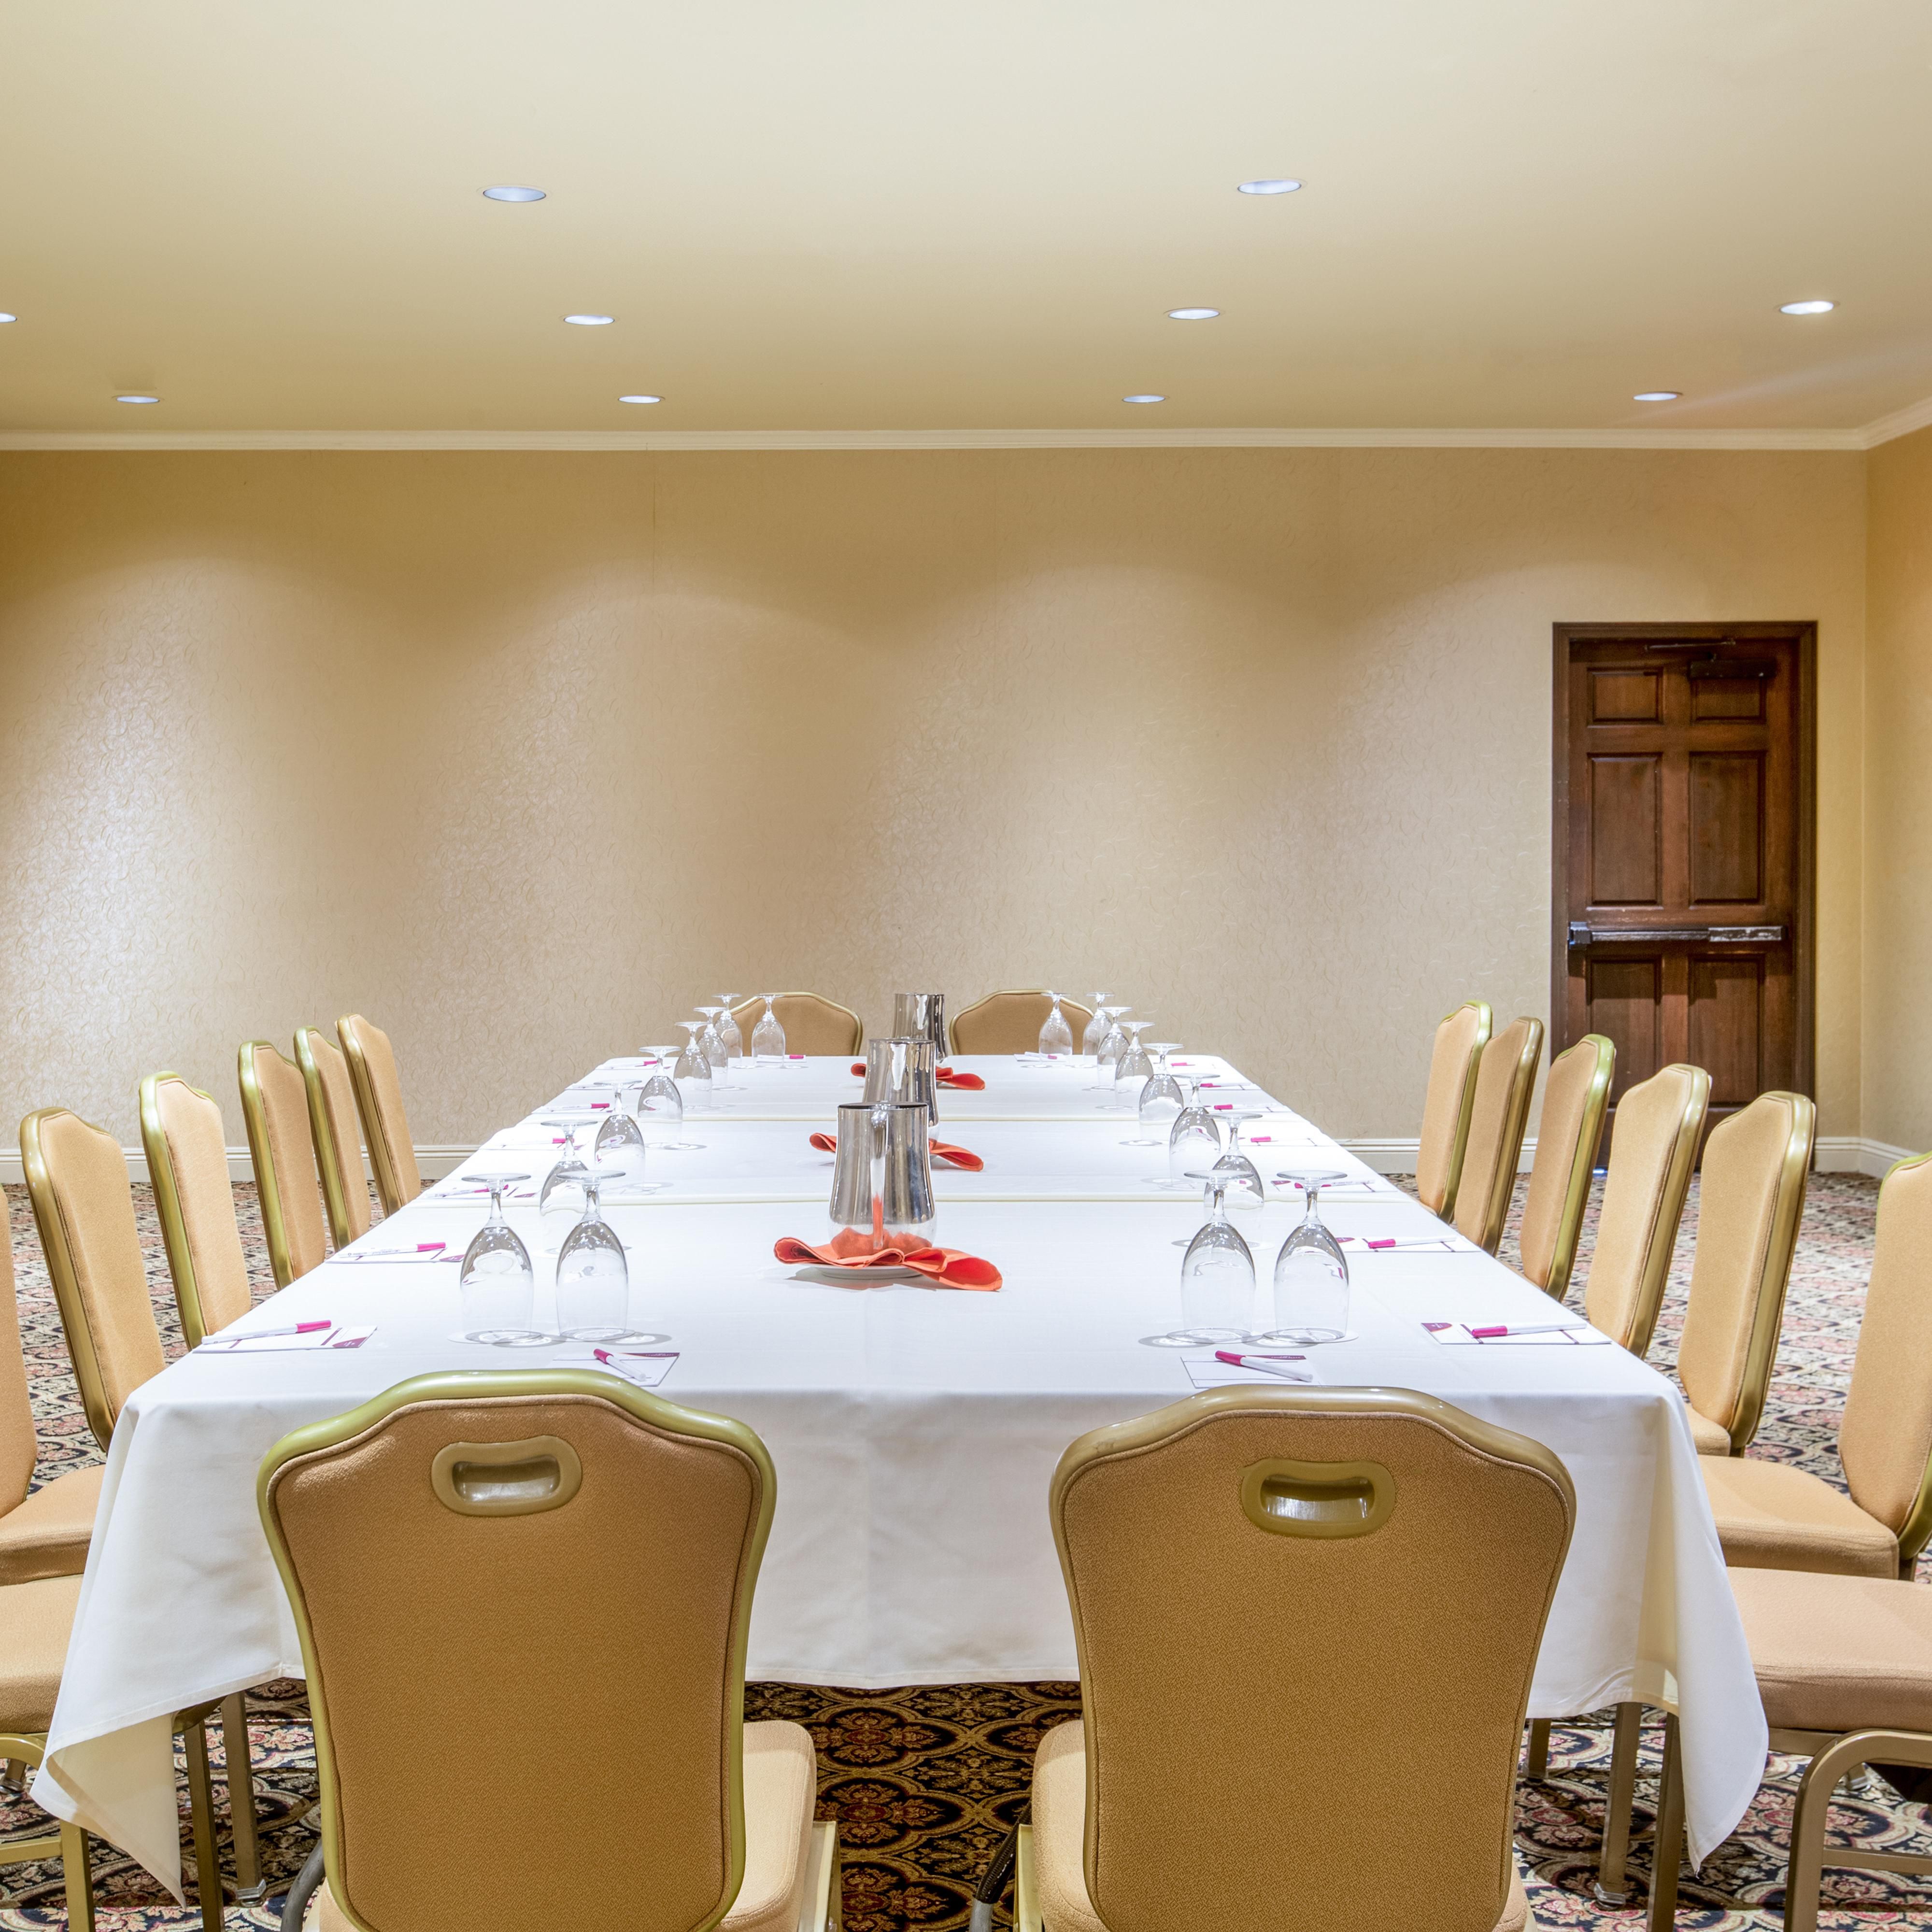 The Cove Room is great for smaller gatherings or breakouts